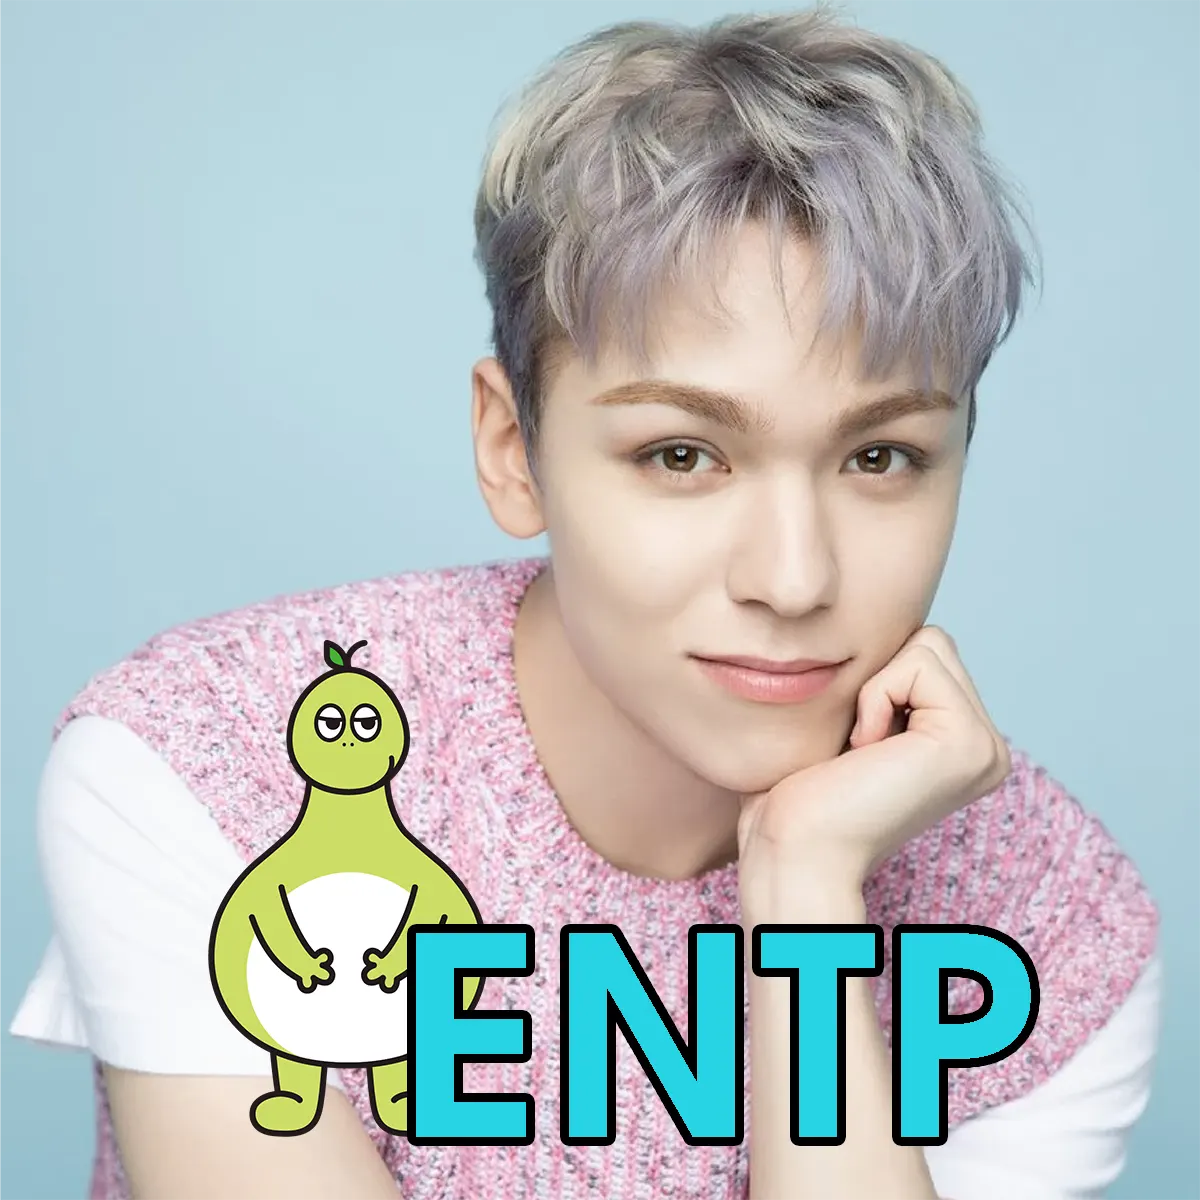 Yoon Bum's Friend Personality Type, MBTI - Which Personality?